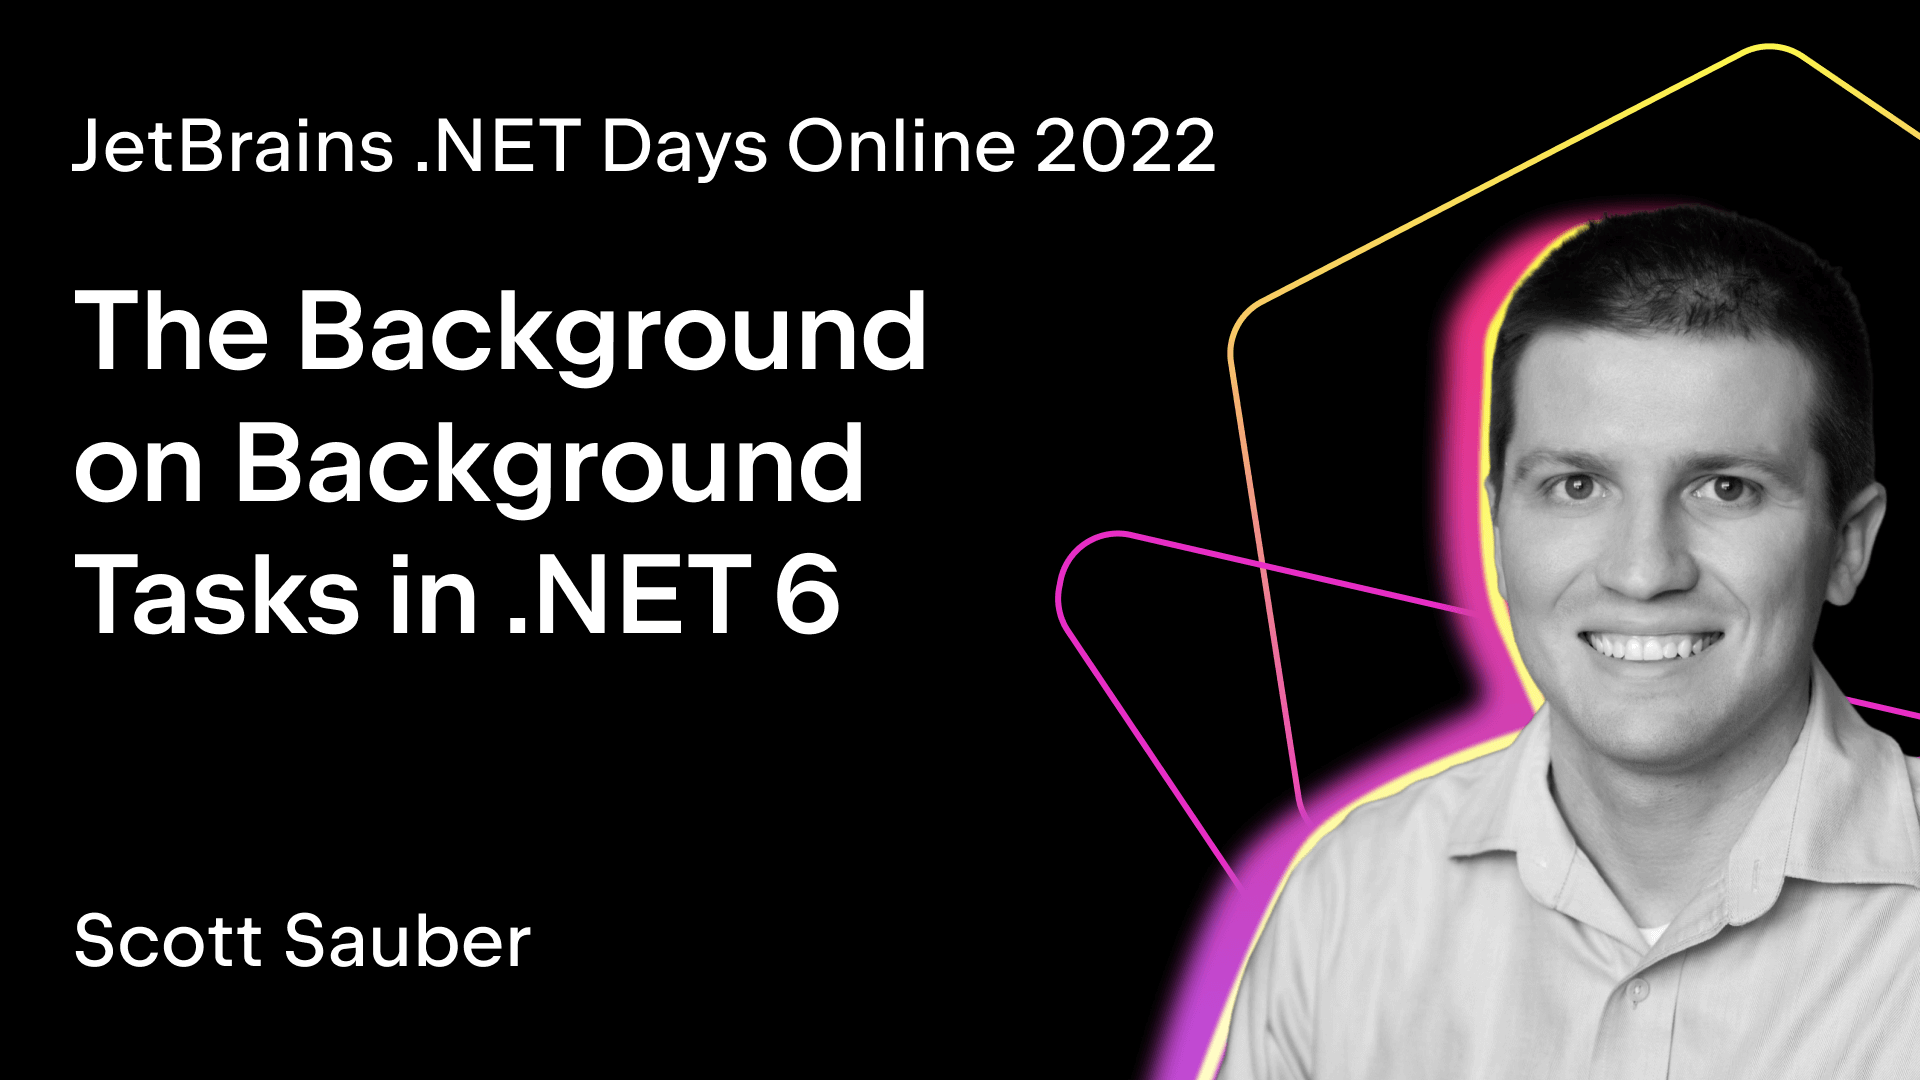 The Background on Background Tasks in .NET 6